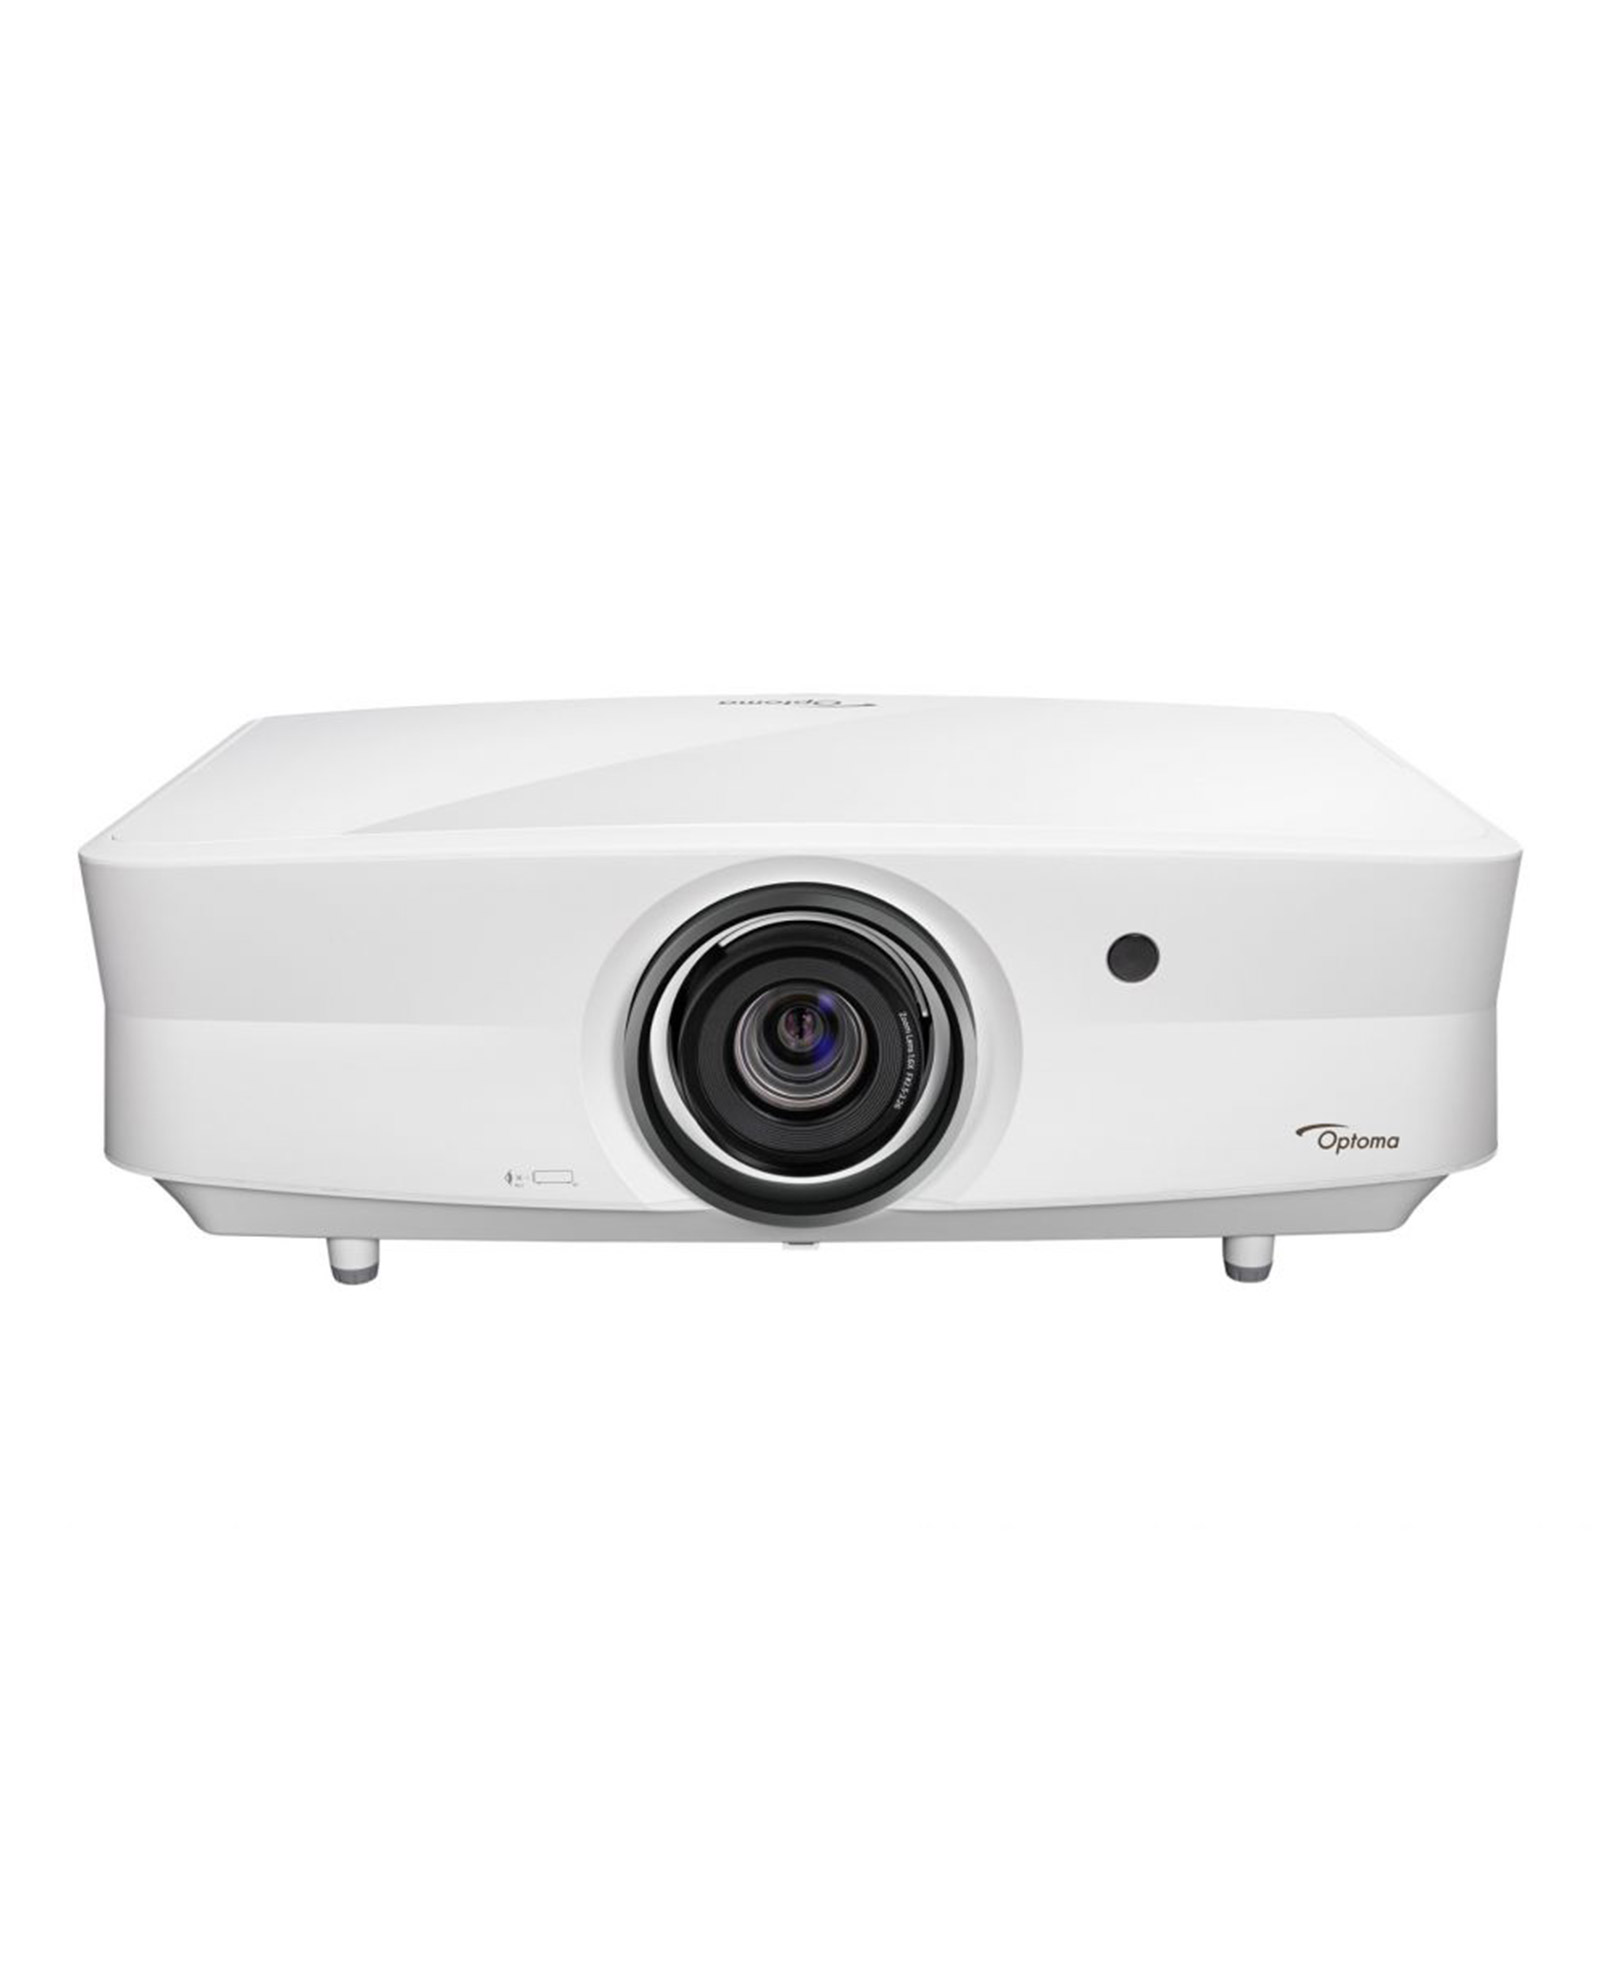 Optoma Uhd65lv 4k Udh Hdr Laser Home Theatre Projector